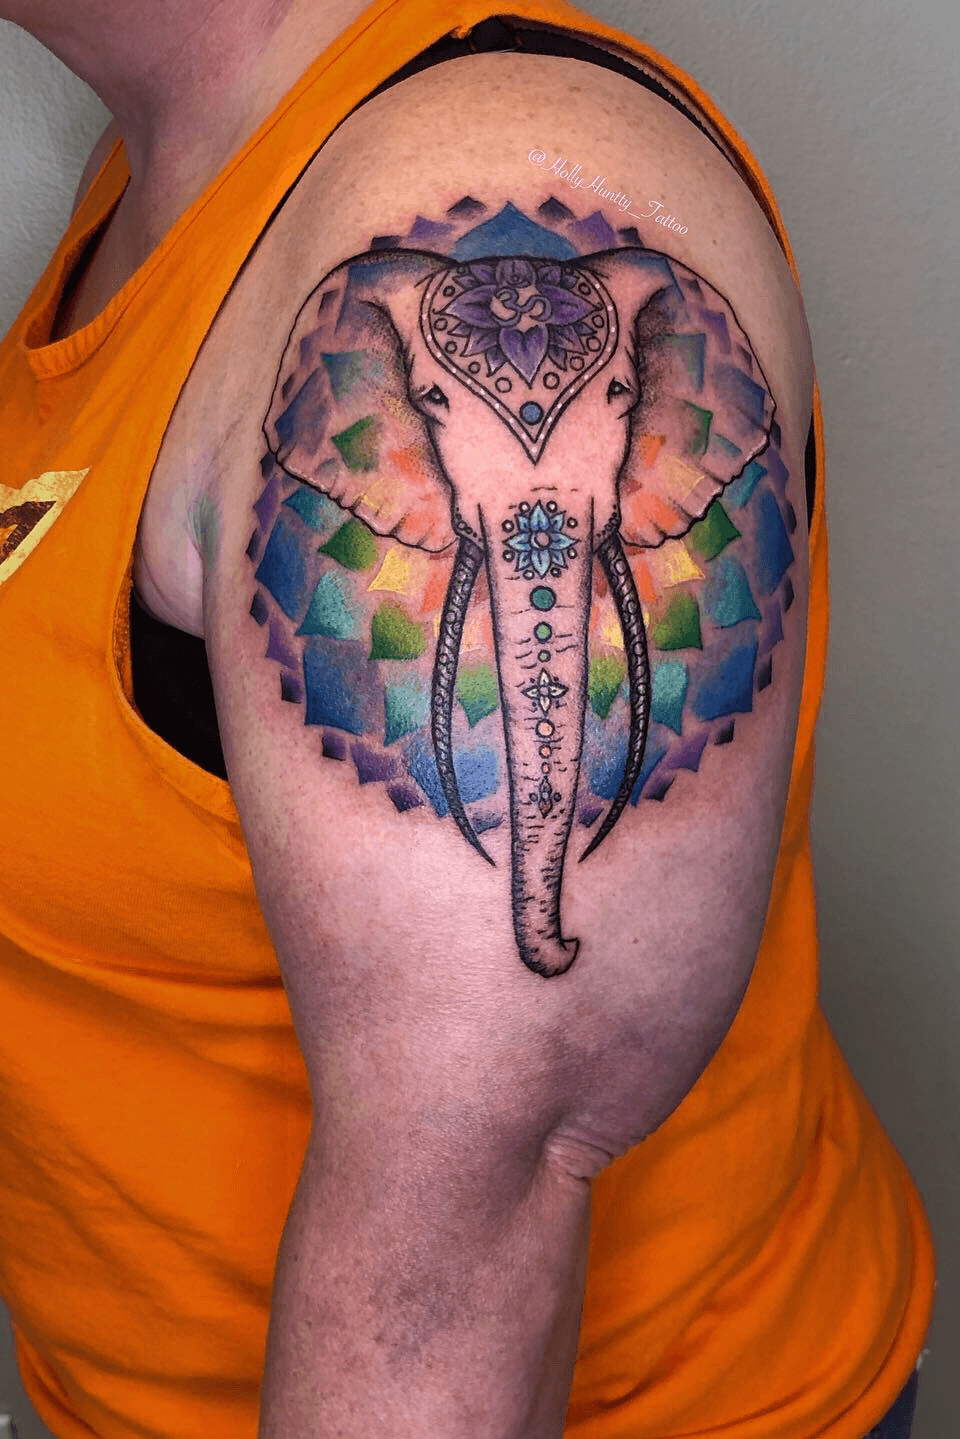 Tattoo uploaded by Holly Hunt • Elephant tattoo - the true spirit of the elephant, color background and trunk art to represent the chakaras, translucent ears to give a ghost feeling. #elephant #